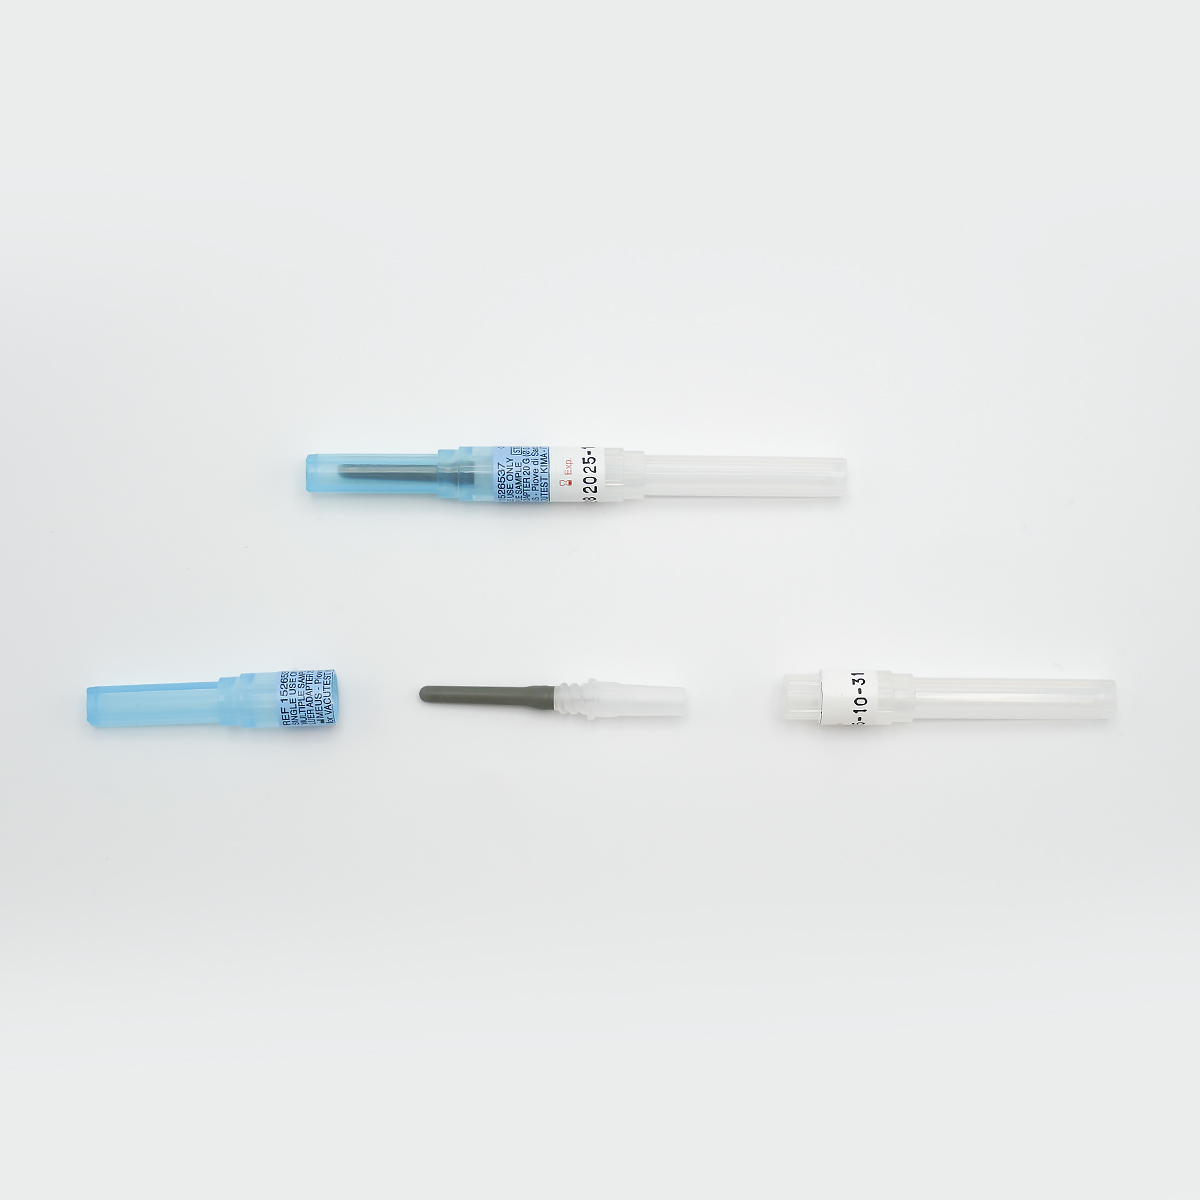 Luer adapter, sterile